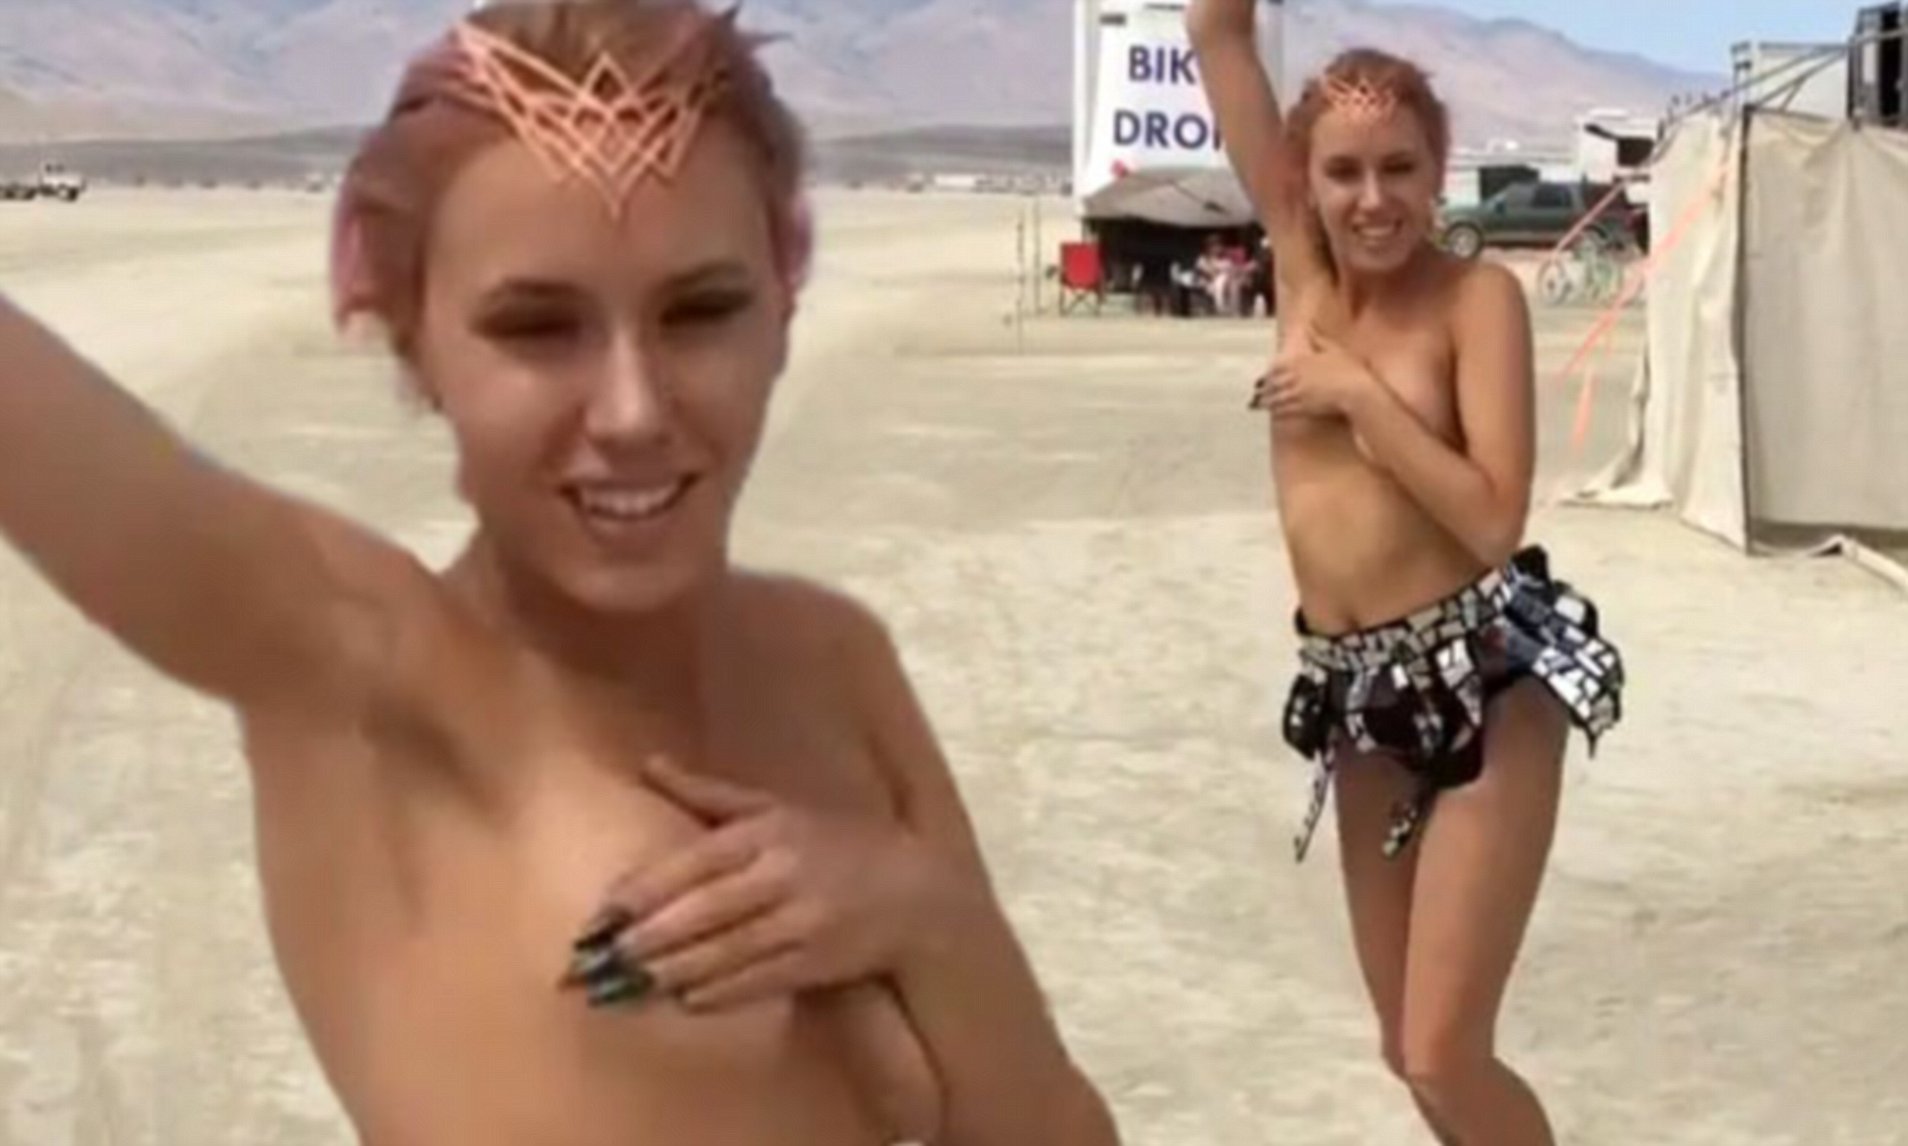 dorothy glidewell share topless at burning man photos